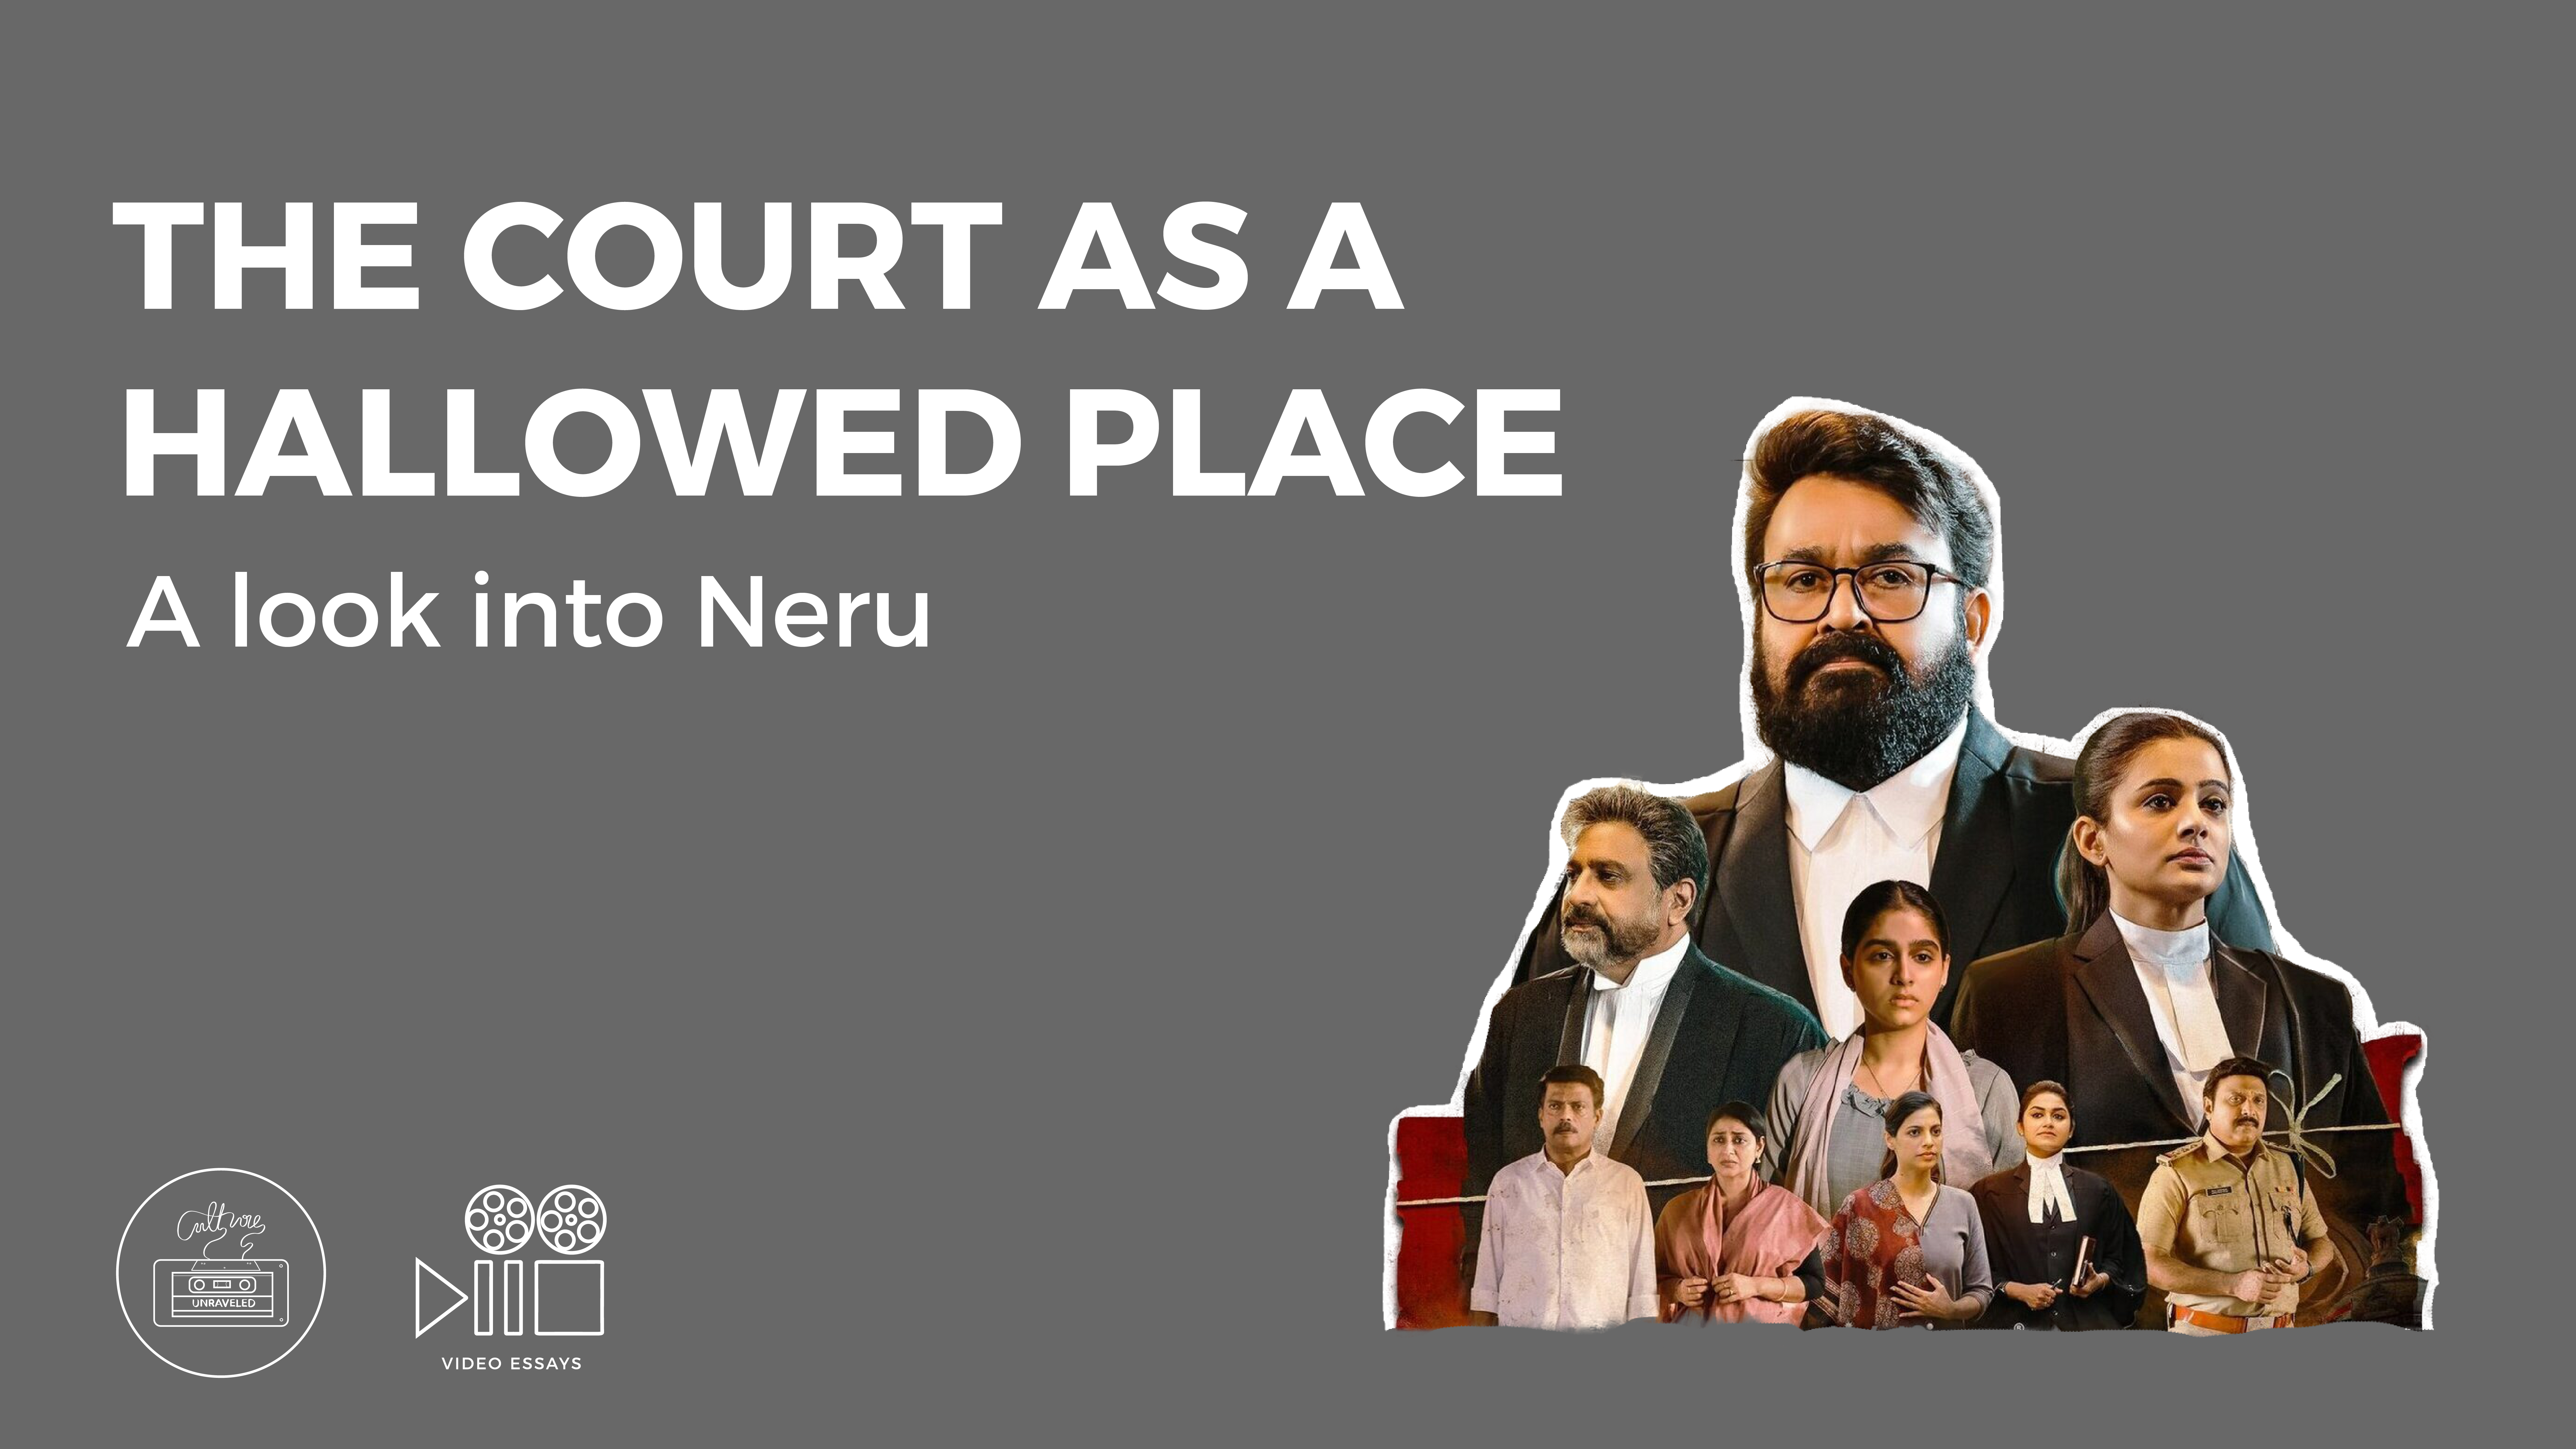 The Court as a Hallowed Place. A Look into Neru